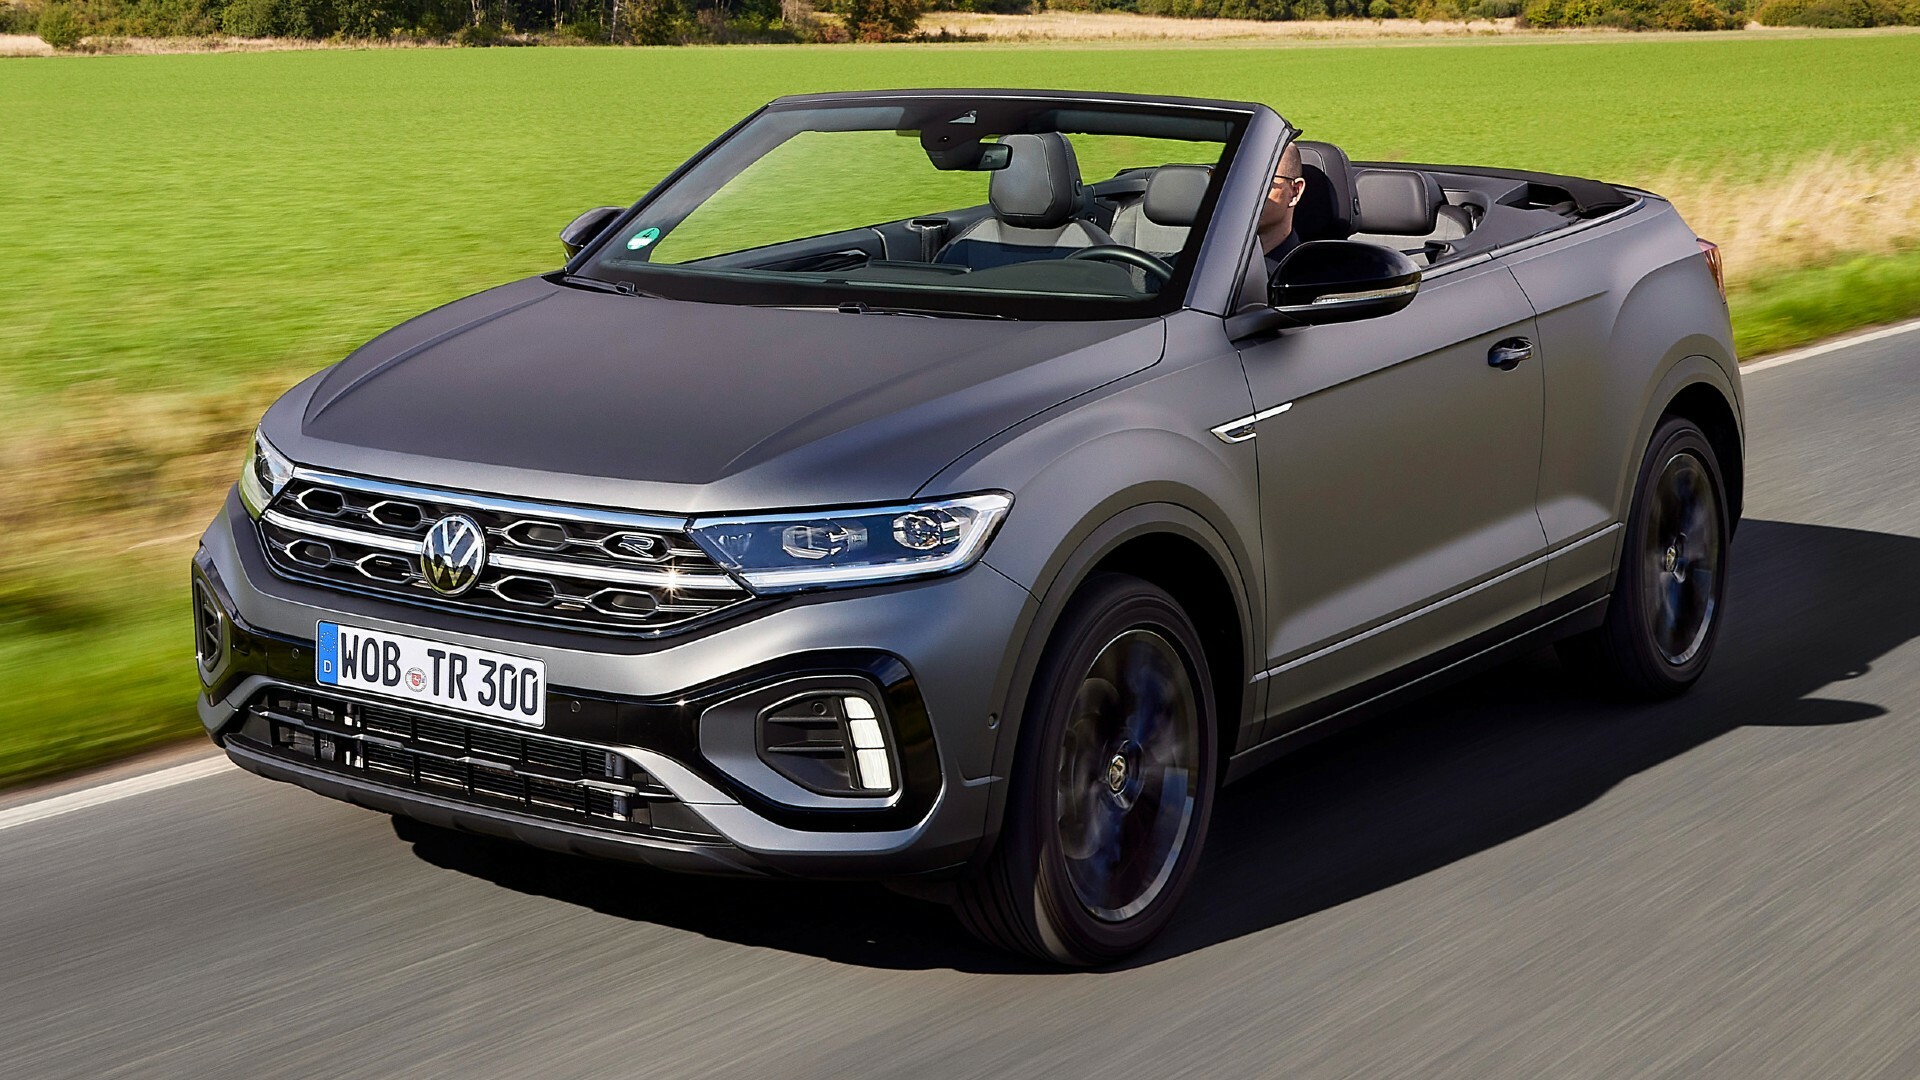 https://www.carscoops.com/wp-content/uploads/2022/12/VW-T-Roc-Cabriolet-Edition-Grey-3s.jpg